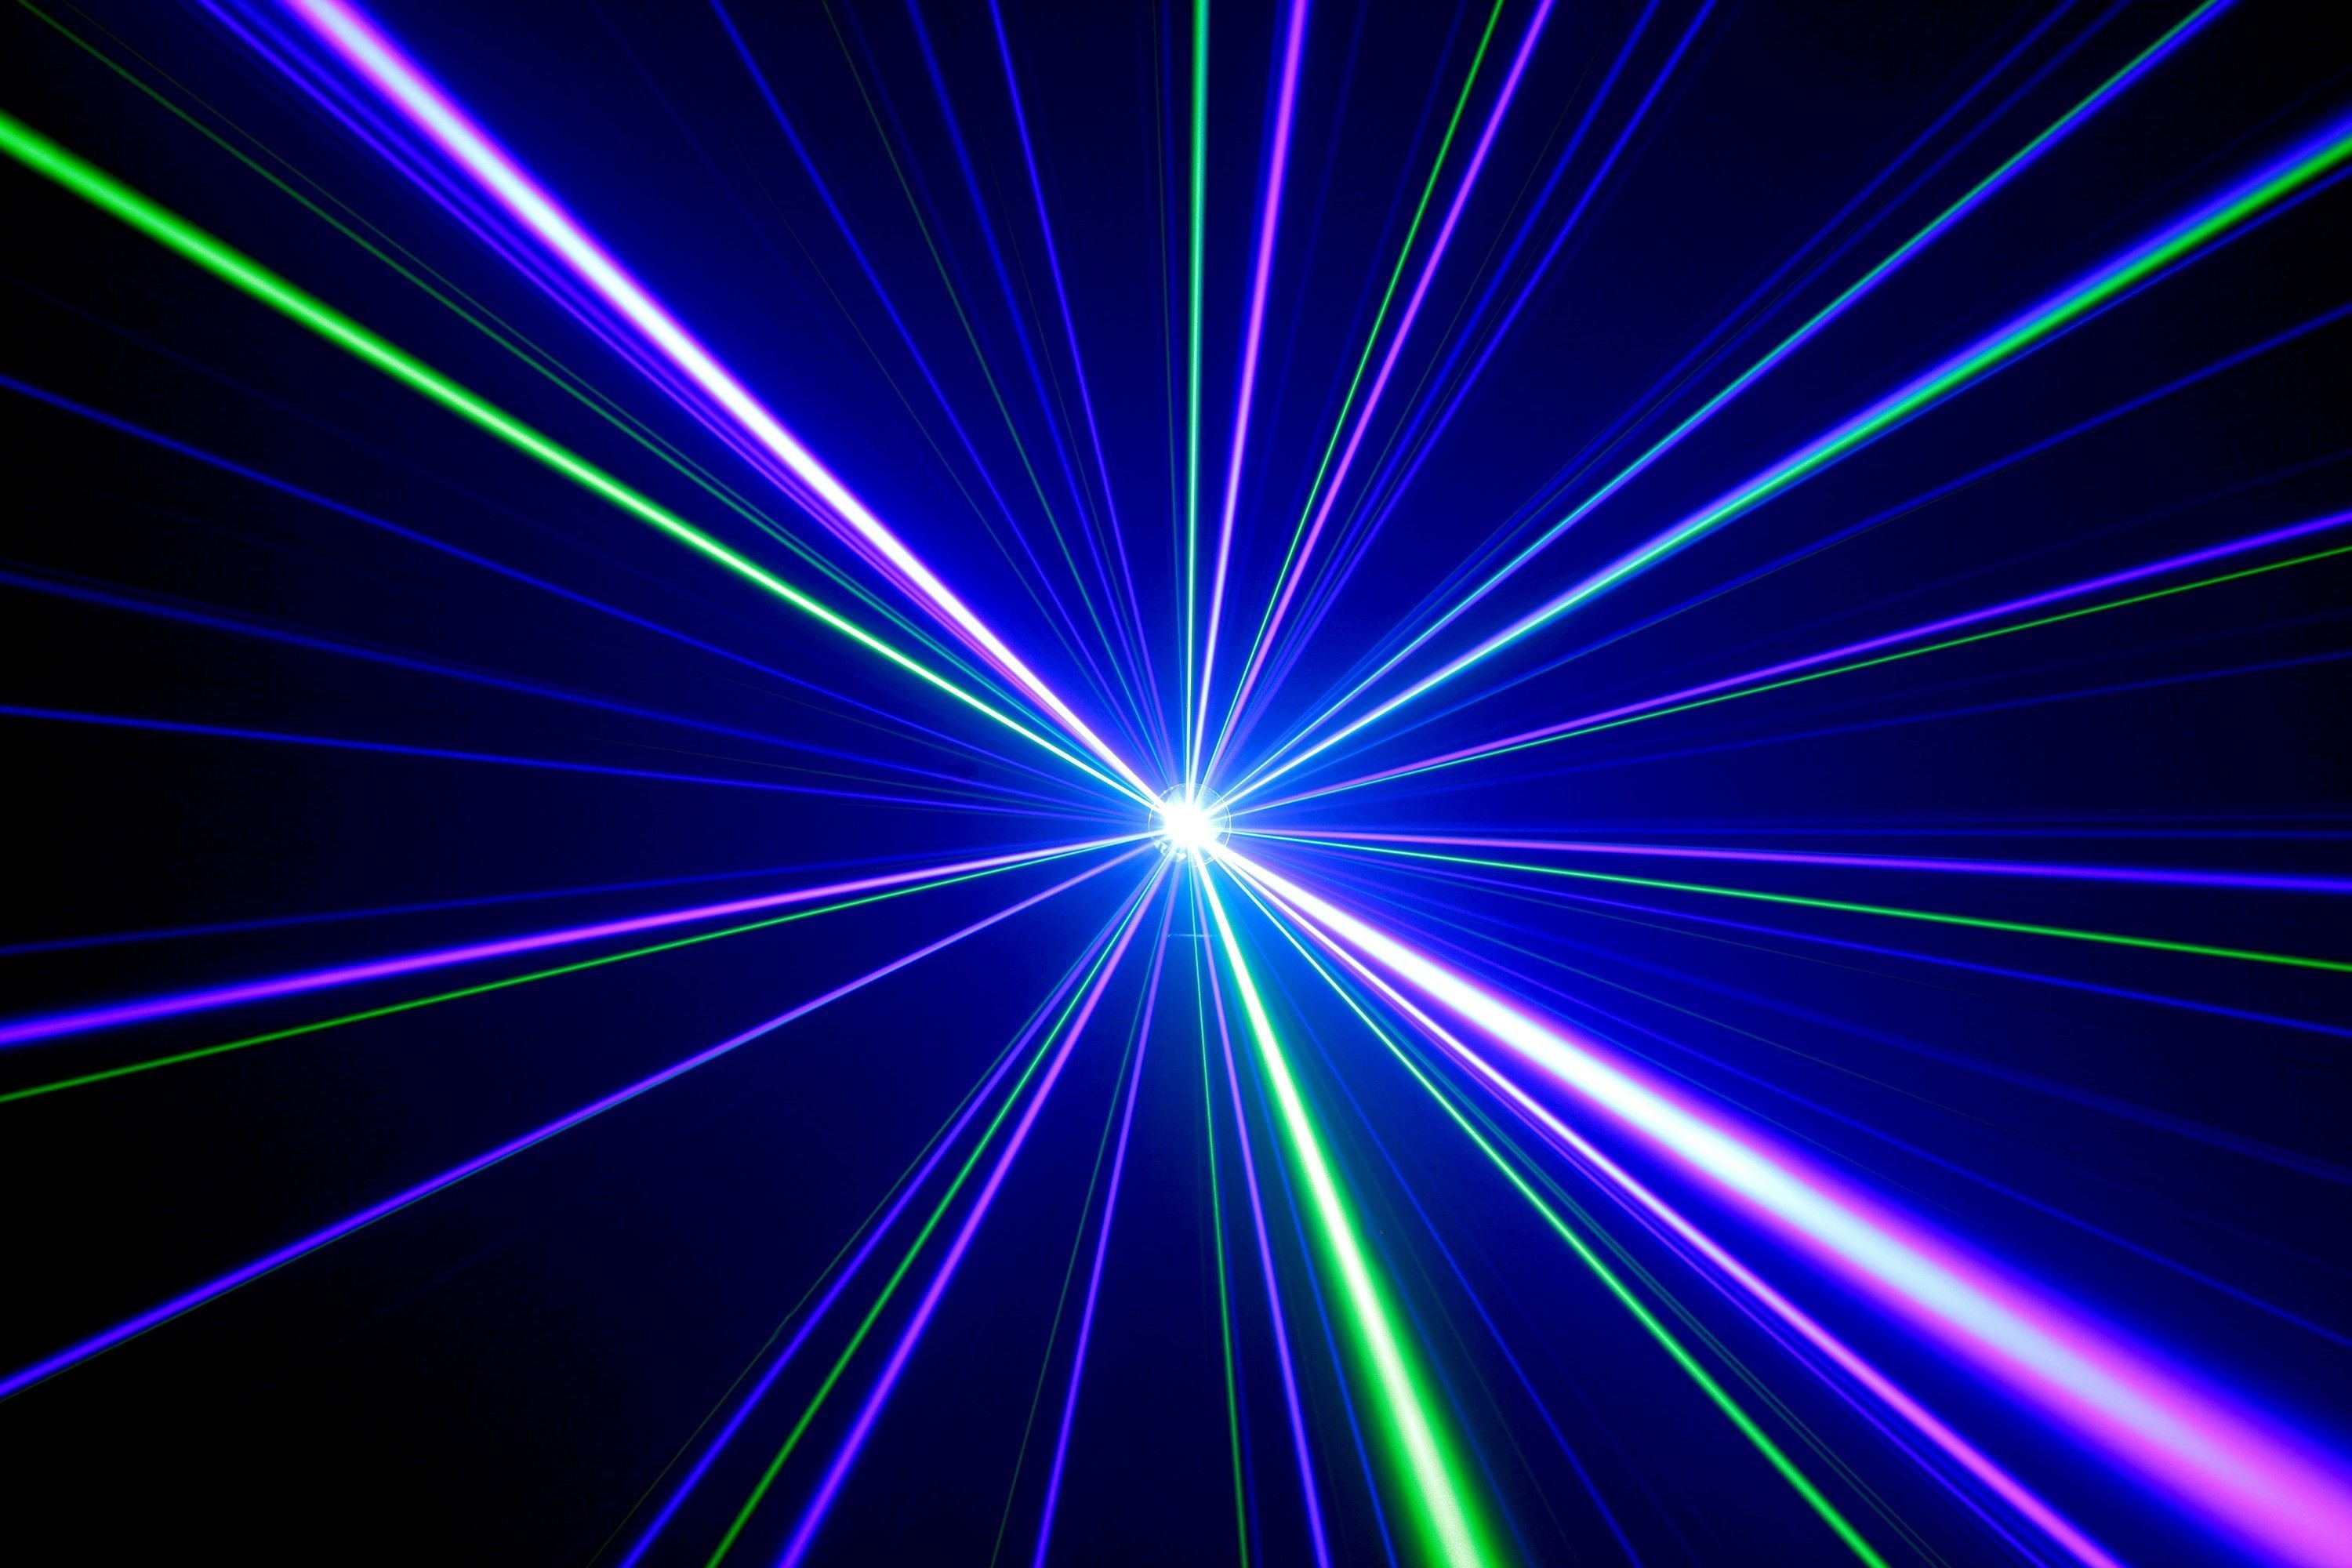 Laser Wallpapers for PC 13040 - HD Wallpapers Site